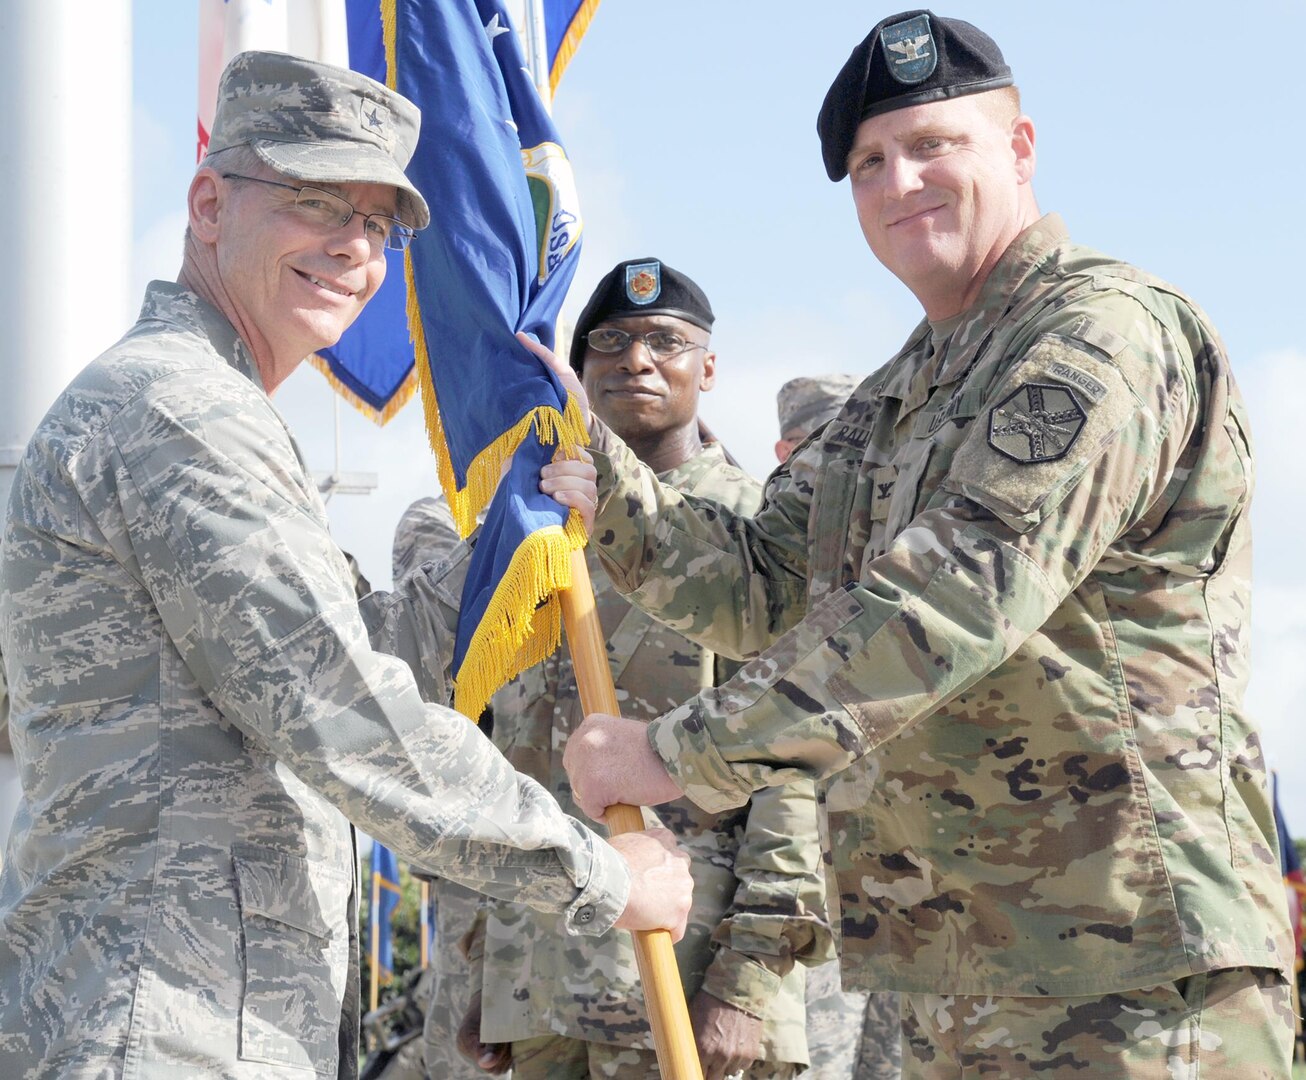 Brig. Gen. Bob LaBrutta (left), 502nd Air Force Base Wing and Joint Base San Antonio commander, passes the 502nd Support Group guidon to Col. David L. Raugh (right), who took over command from Col. Steven A. Toft in a change of command ceremony at Joint Base San Antonio-Fort Sam Houston June 22.